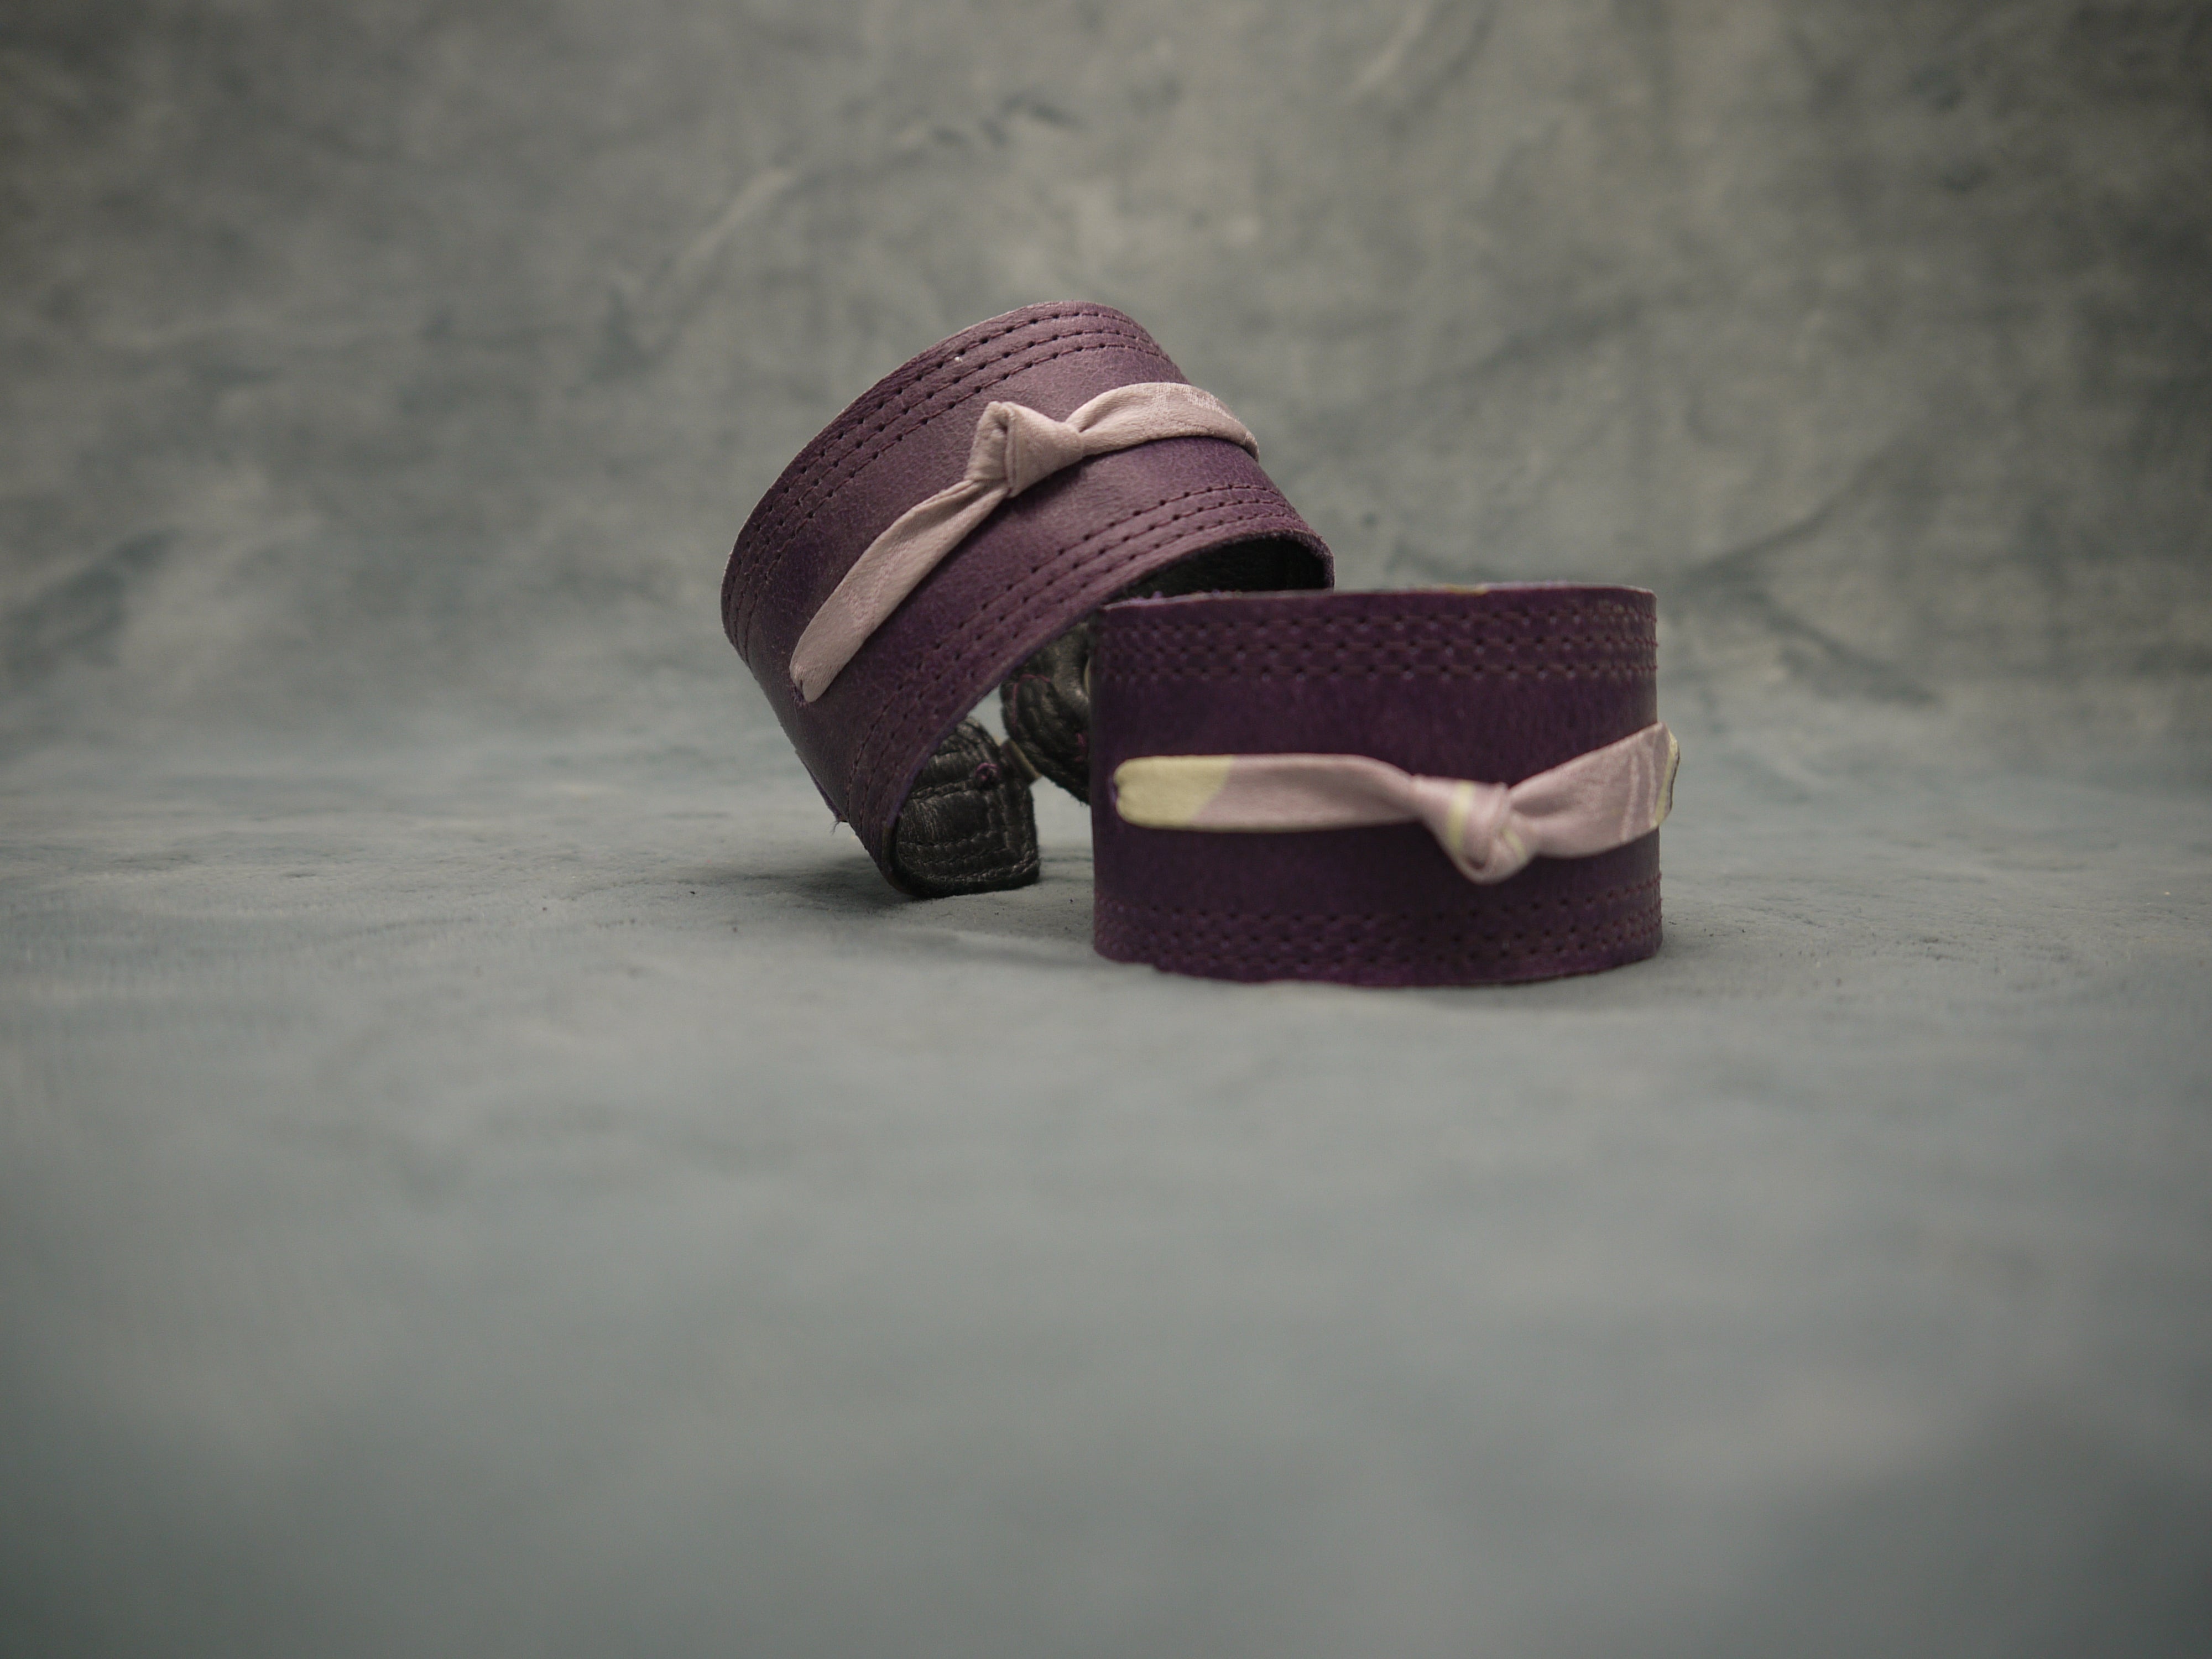 Royal Purple slimline Italian leather cuff with lilac slim silk knot central on the cuff. The cugff has elegant repeat stitch detail around the edges. Close-Up Image